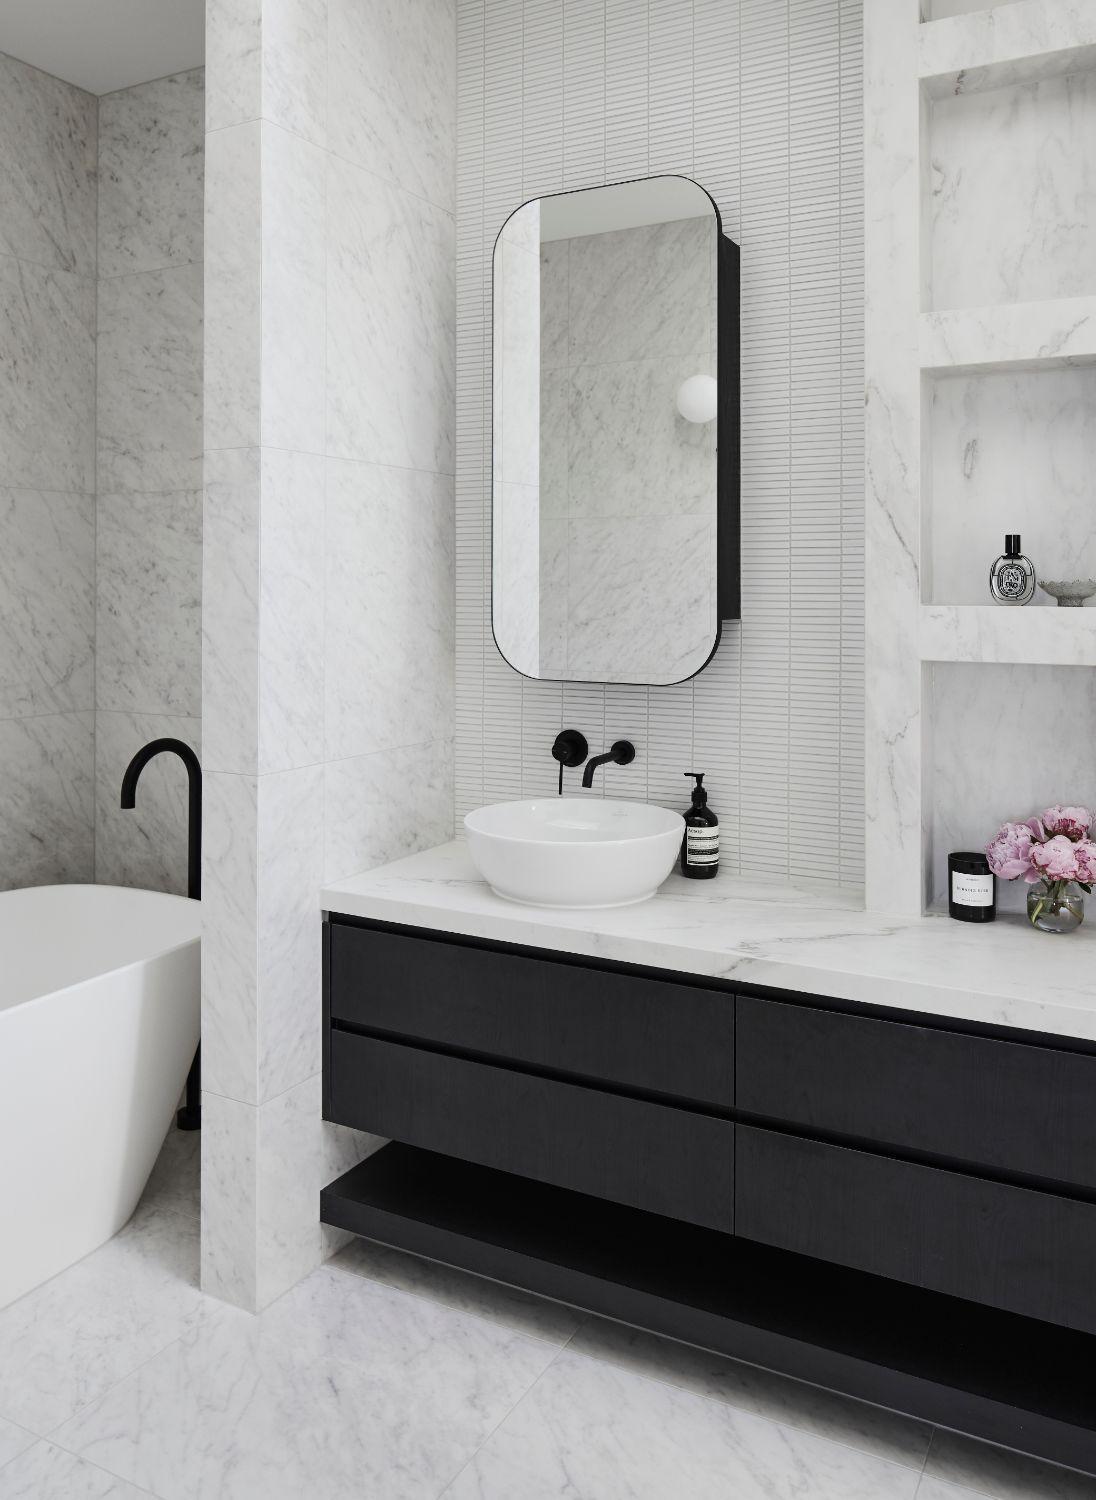 White Stone Used Floor To Ceiling In Ensuite With Black Drawers And Fittings